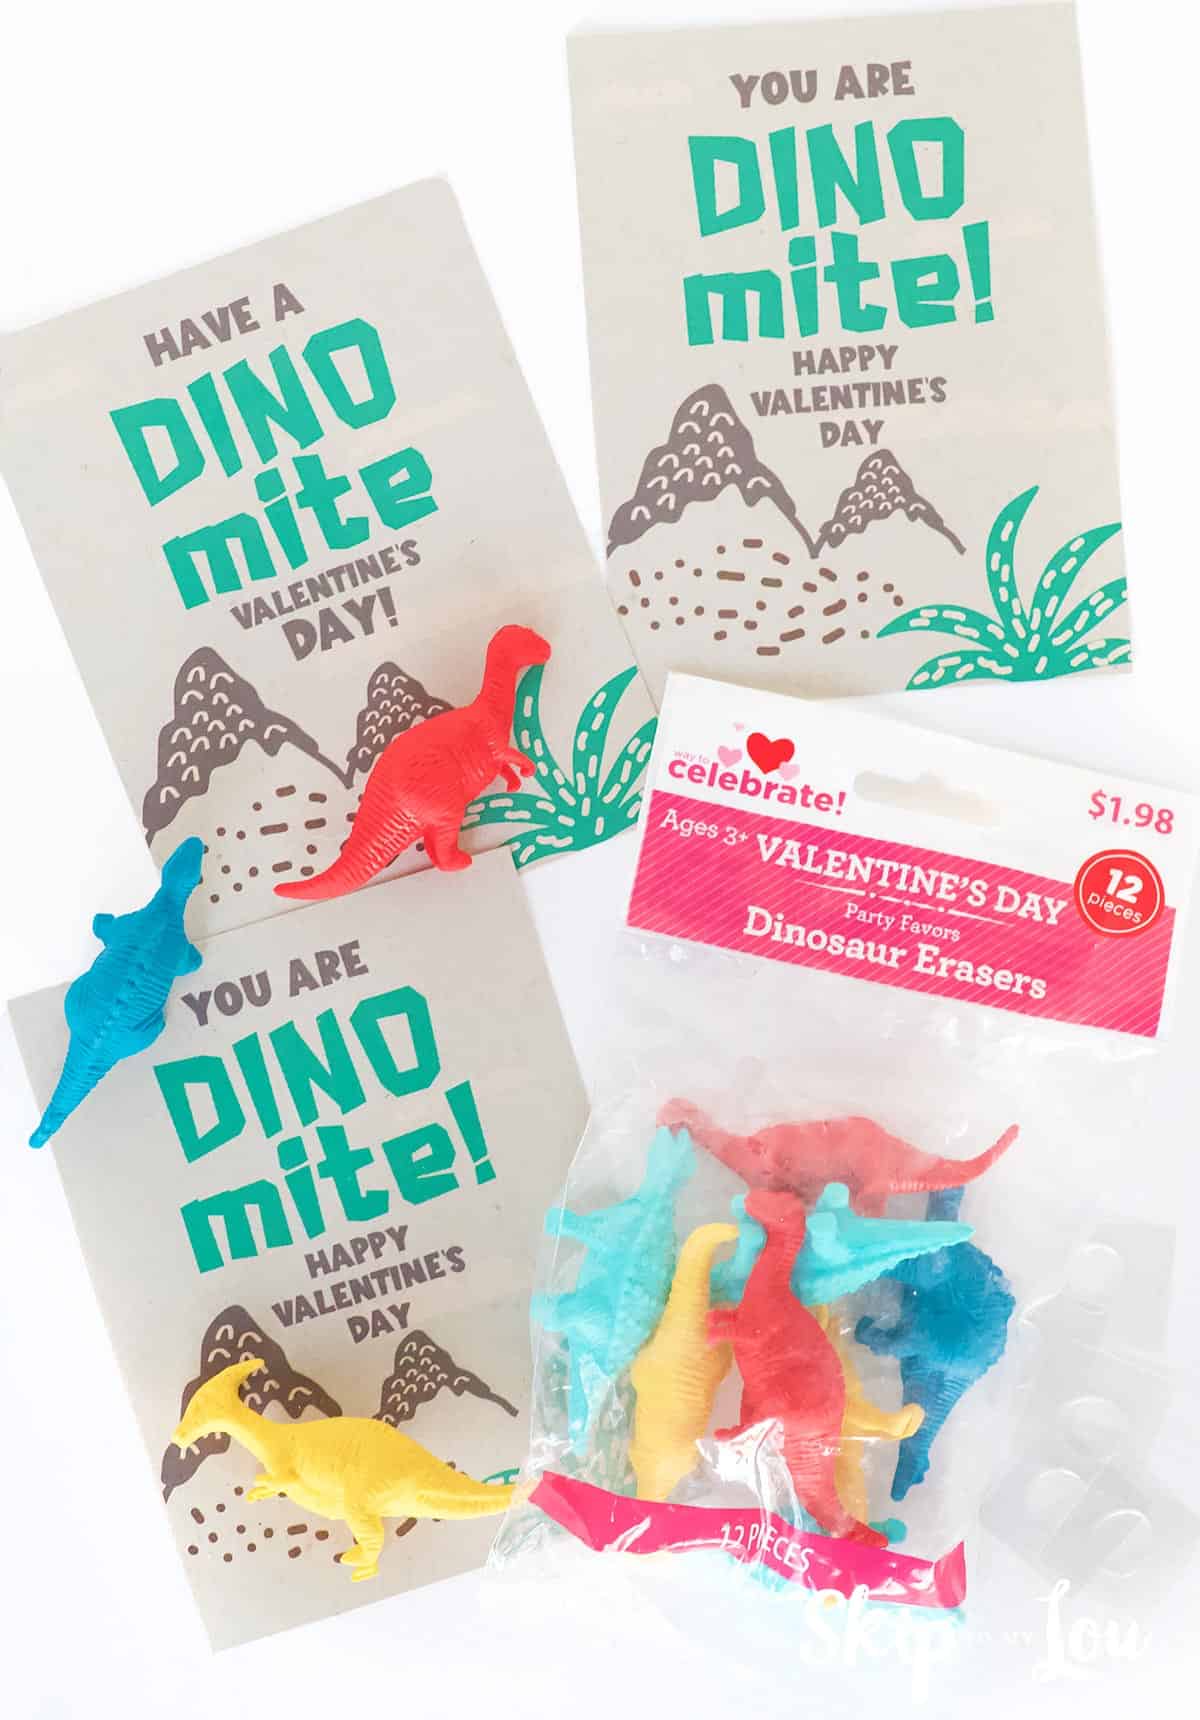 Red and white package of 12 dinosaur shaped erasers in yellow, red, light blue and dark blue. Three cards with dinosaur Valentine messages, by Skip to my Lou.